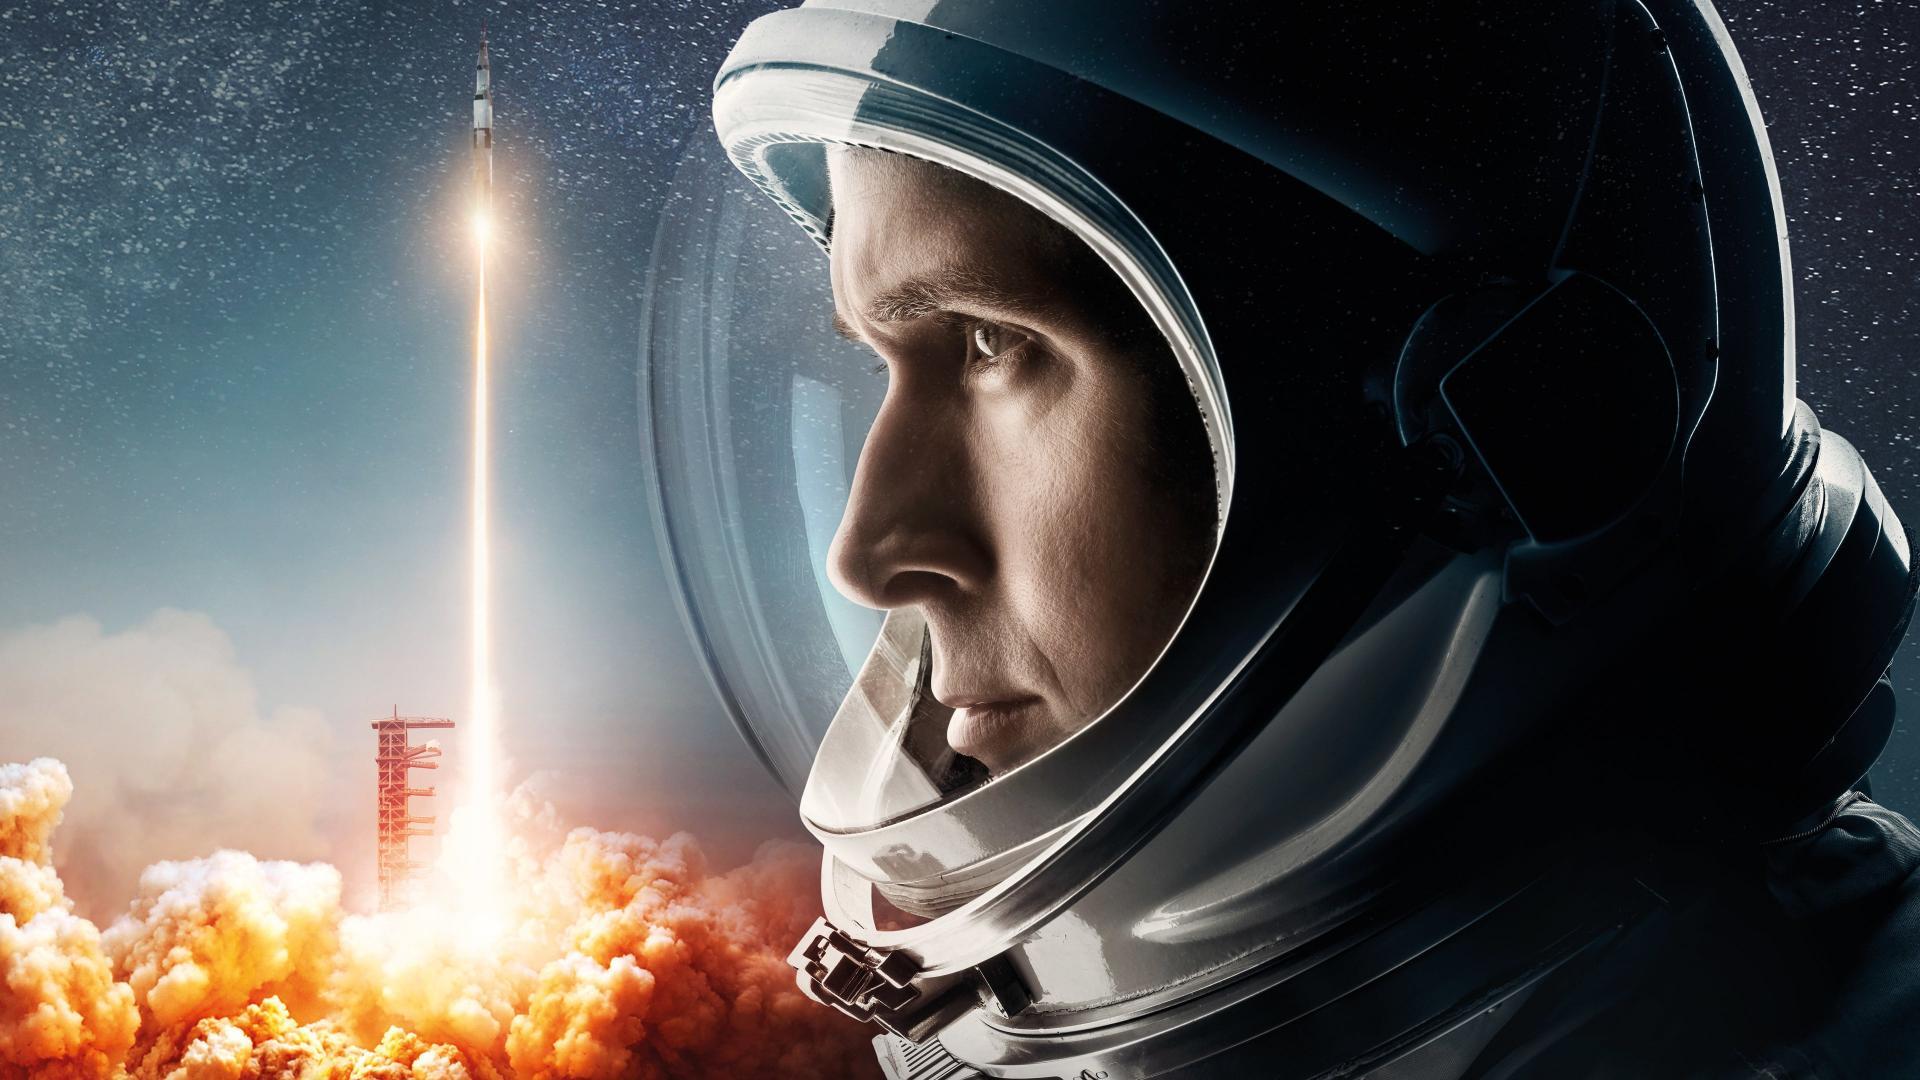 First Man Movie Official Poster 2018 Wallpapers